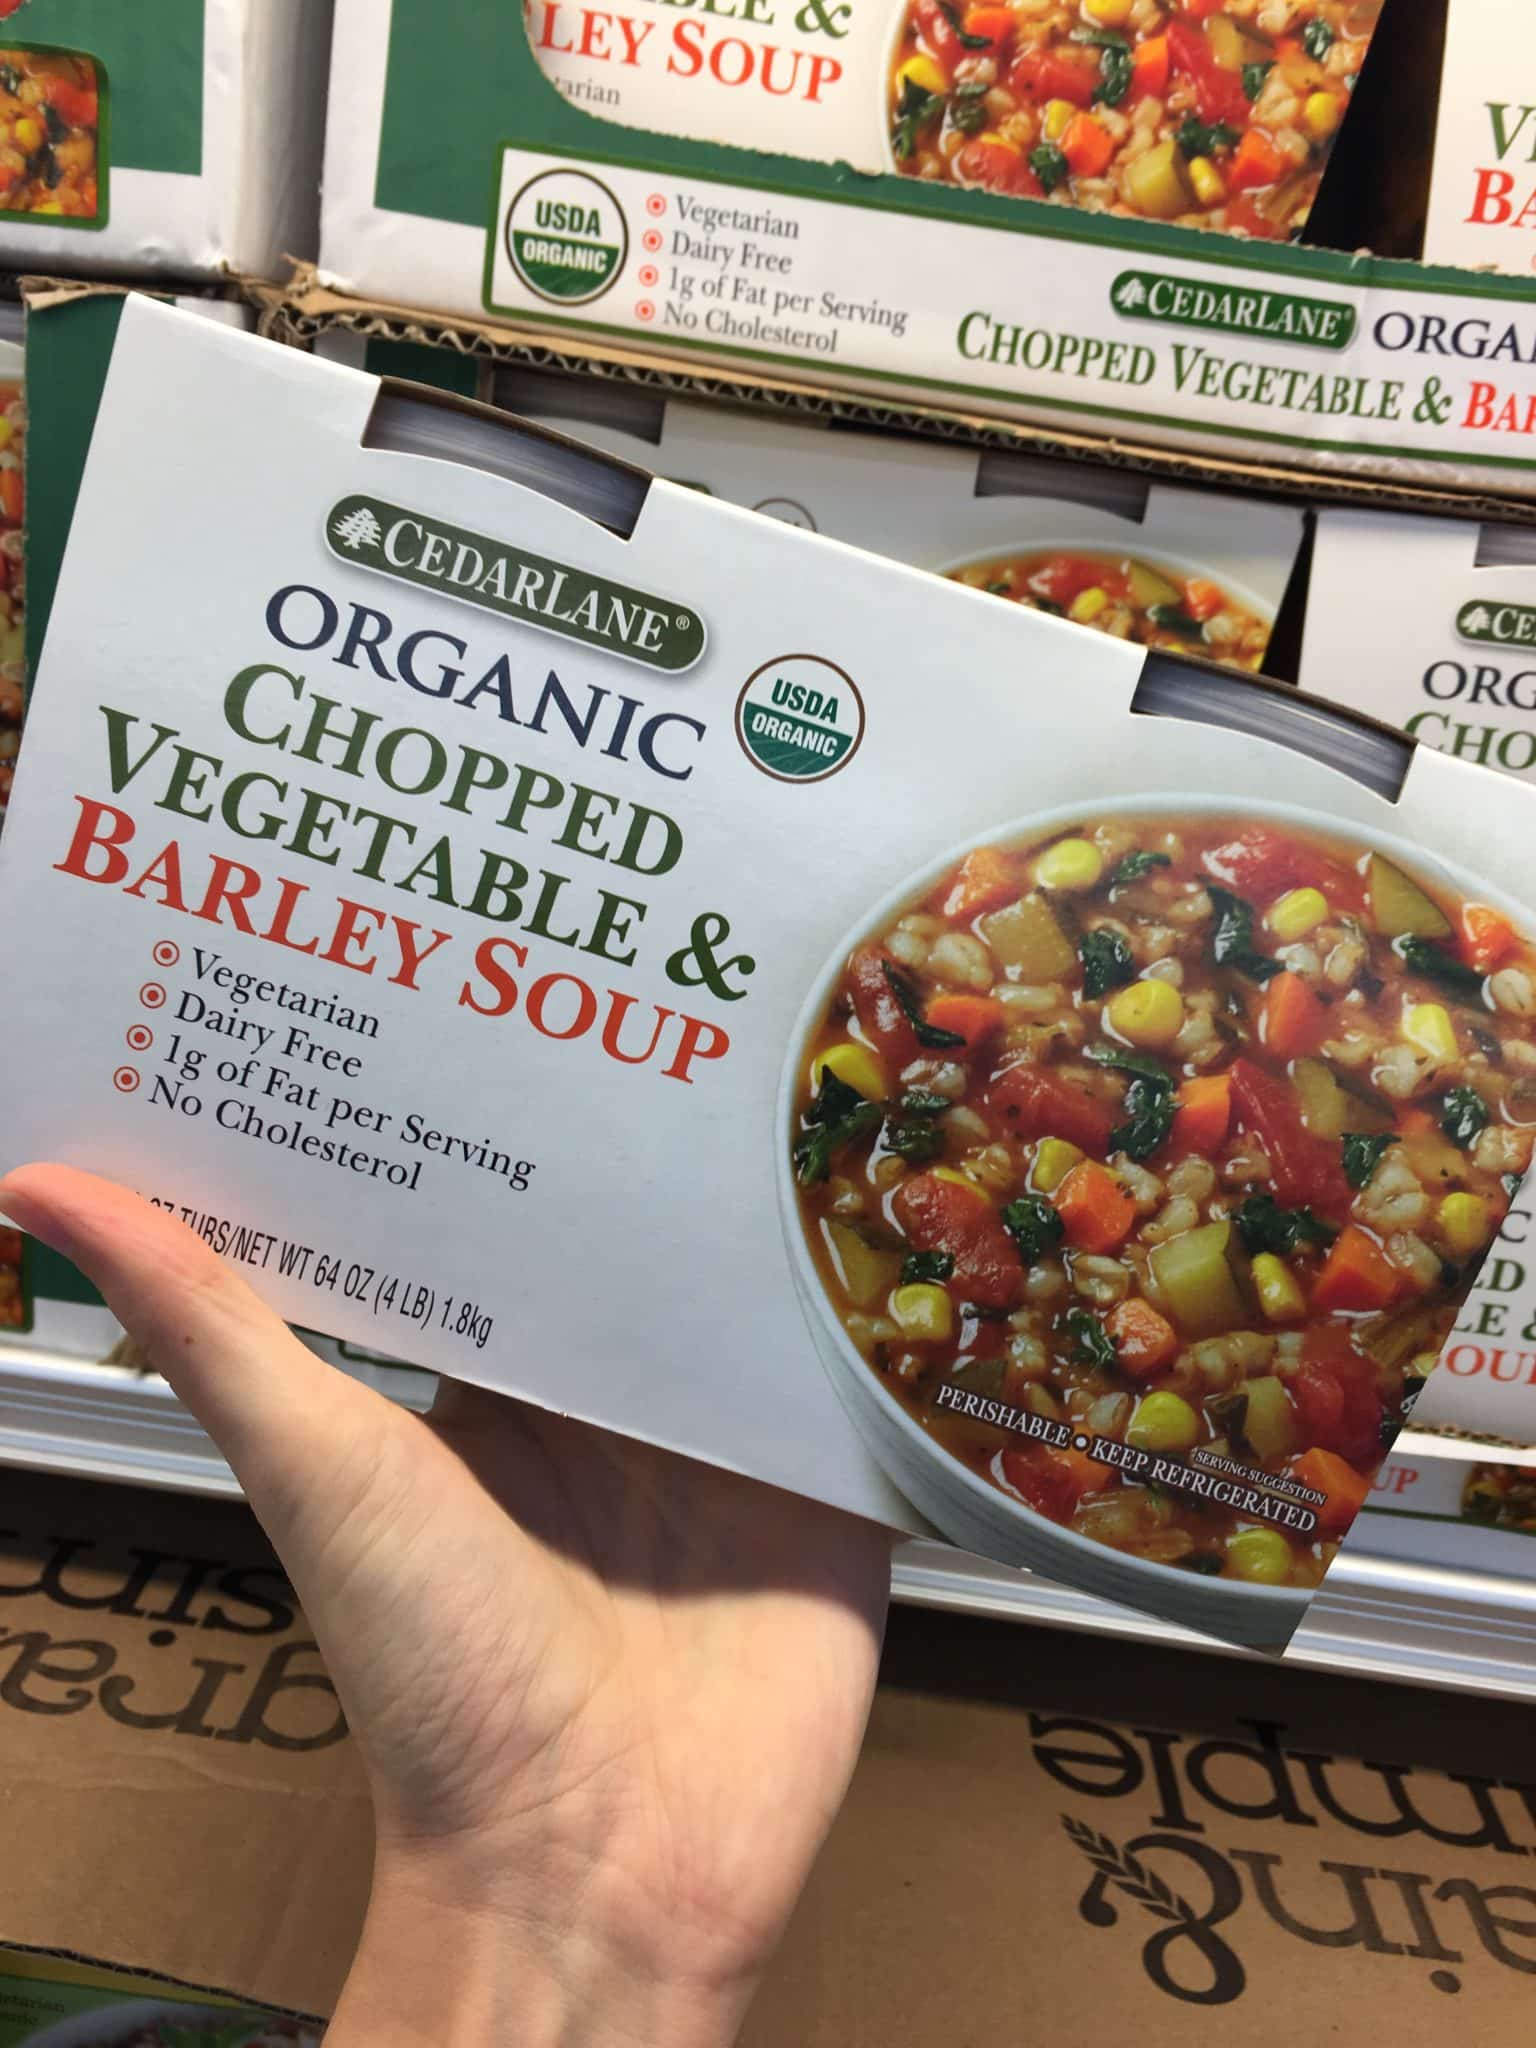 Chopped vegetable and barley soup from Costco